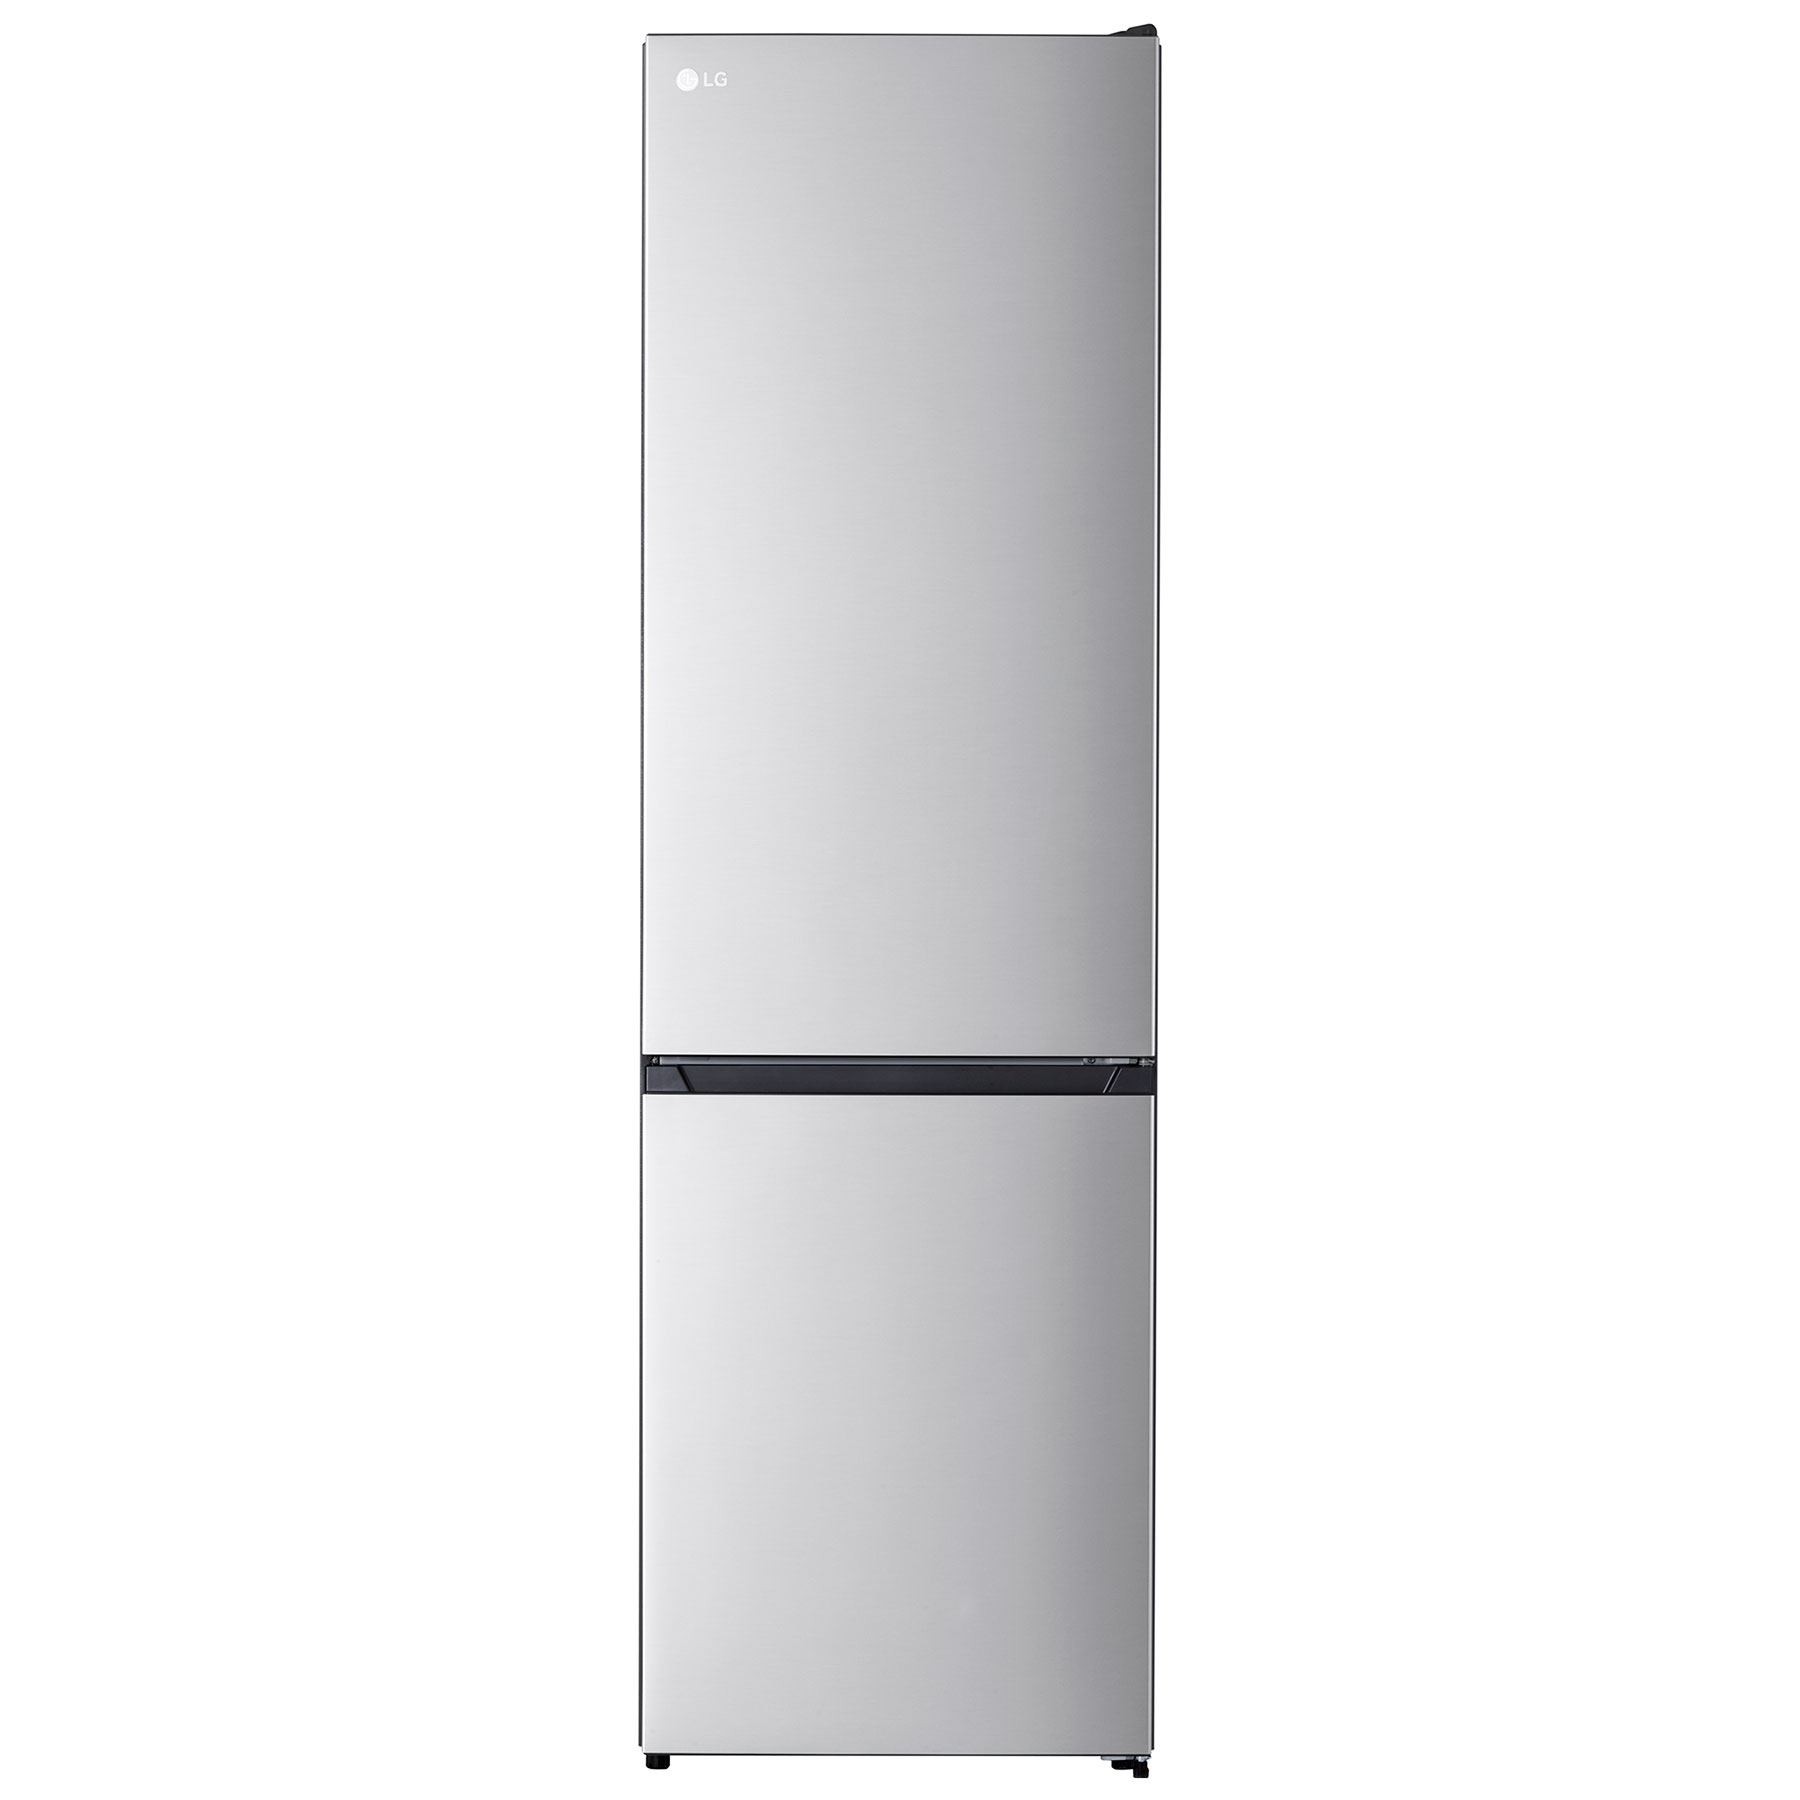 Image of LG GBM22HSADH 60cm Frost Free Fridge Freezer in Silver 2 00m D Rated